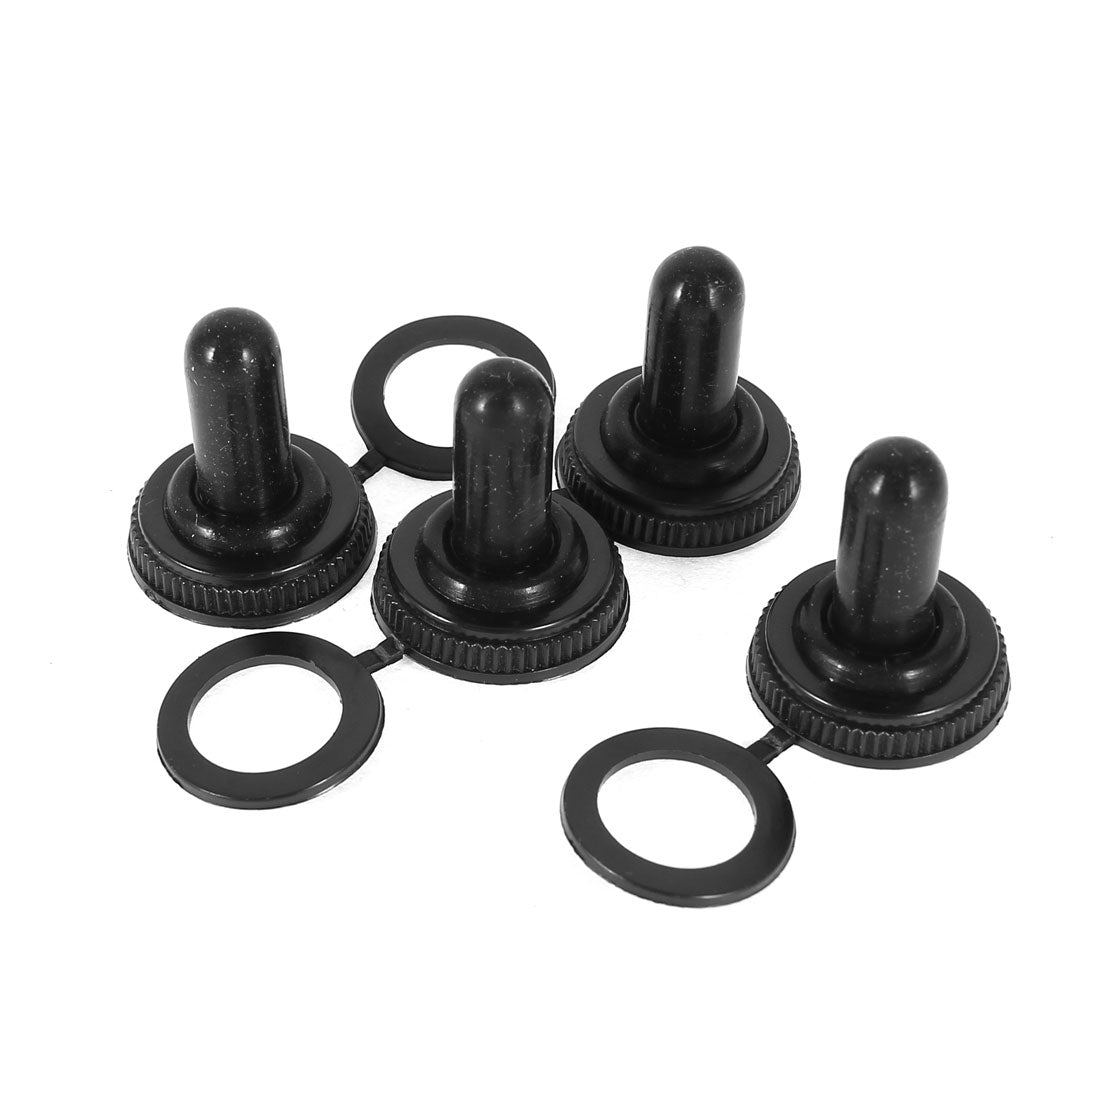 uxcell Uxcell 4pcs 11mm Threaded Waterproof Toggle Switch Rubber Cover Cap Seal